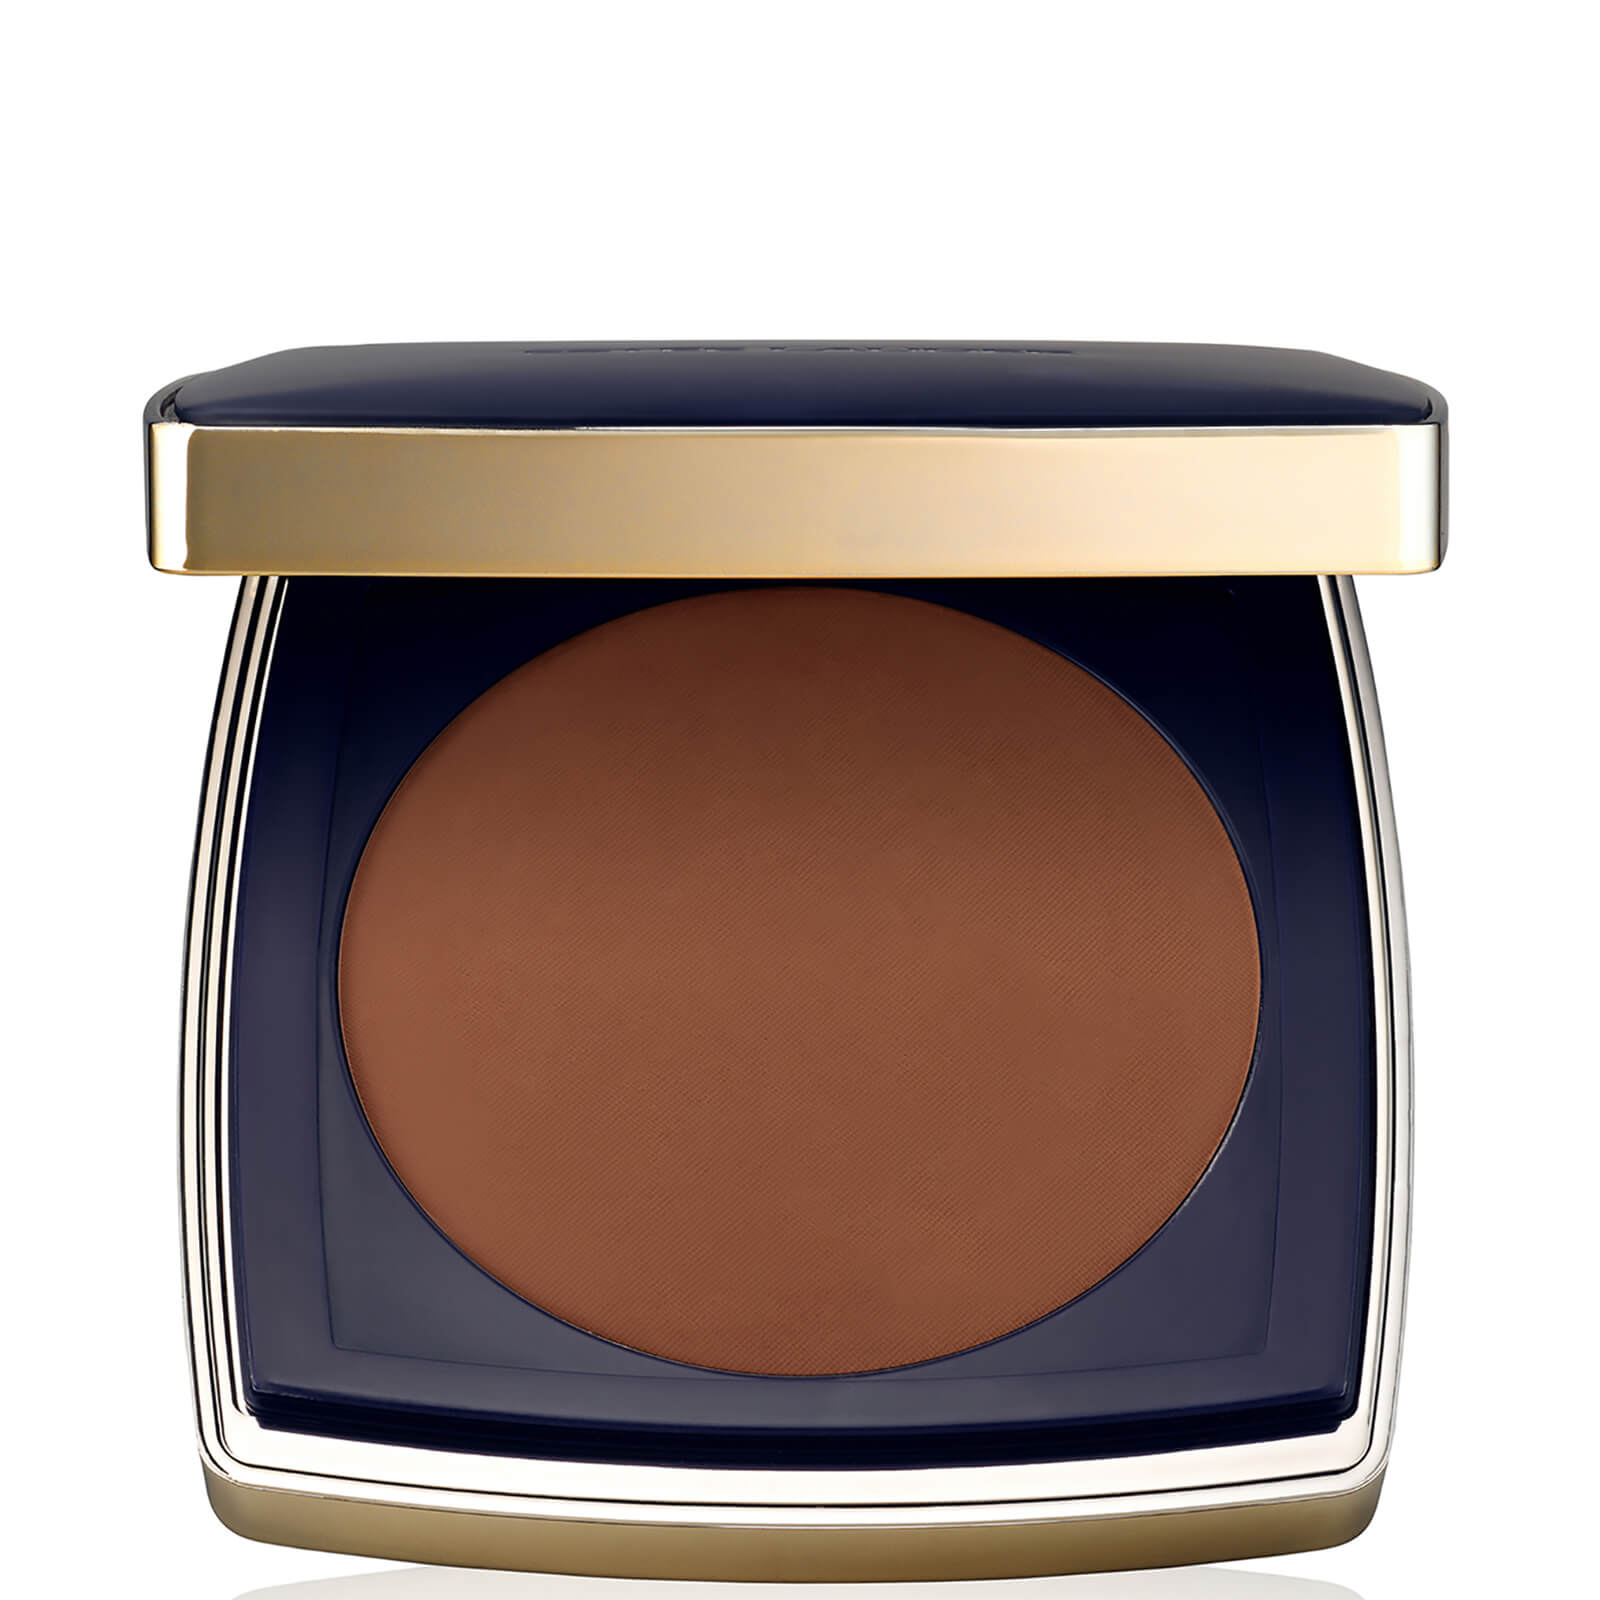 Estee Lauder Double Wear Stay-in-Place Matte Powder Foundation SPF10 12g (Various Shades) - 8N1 Espr